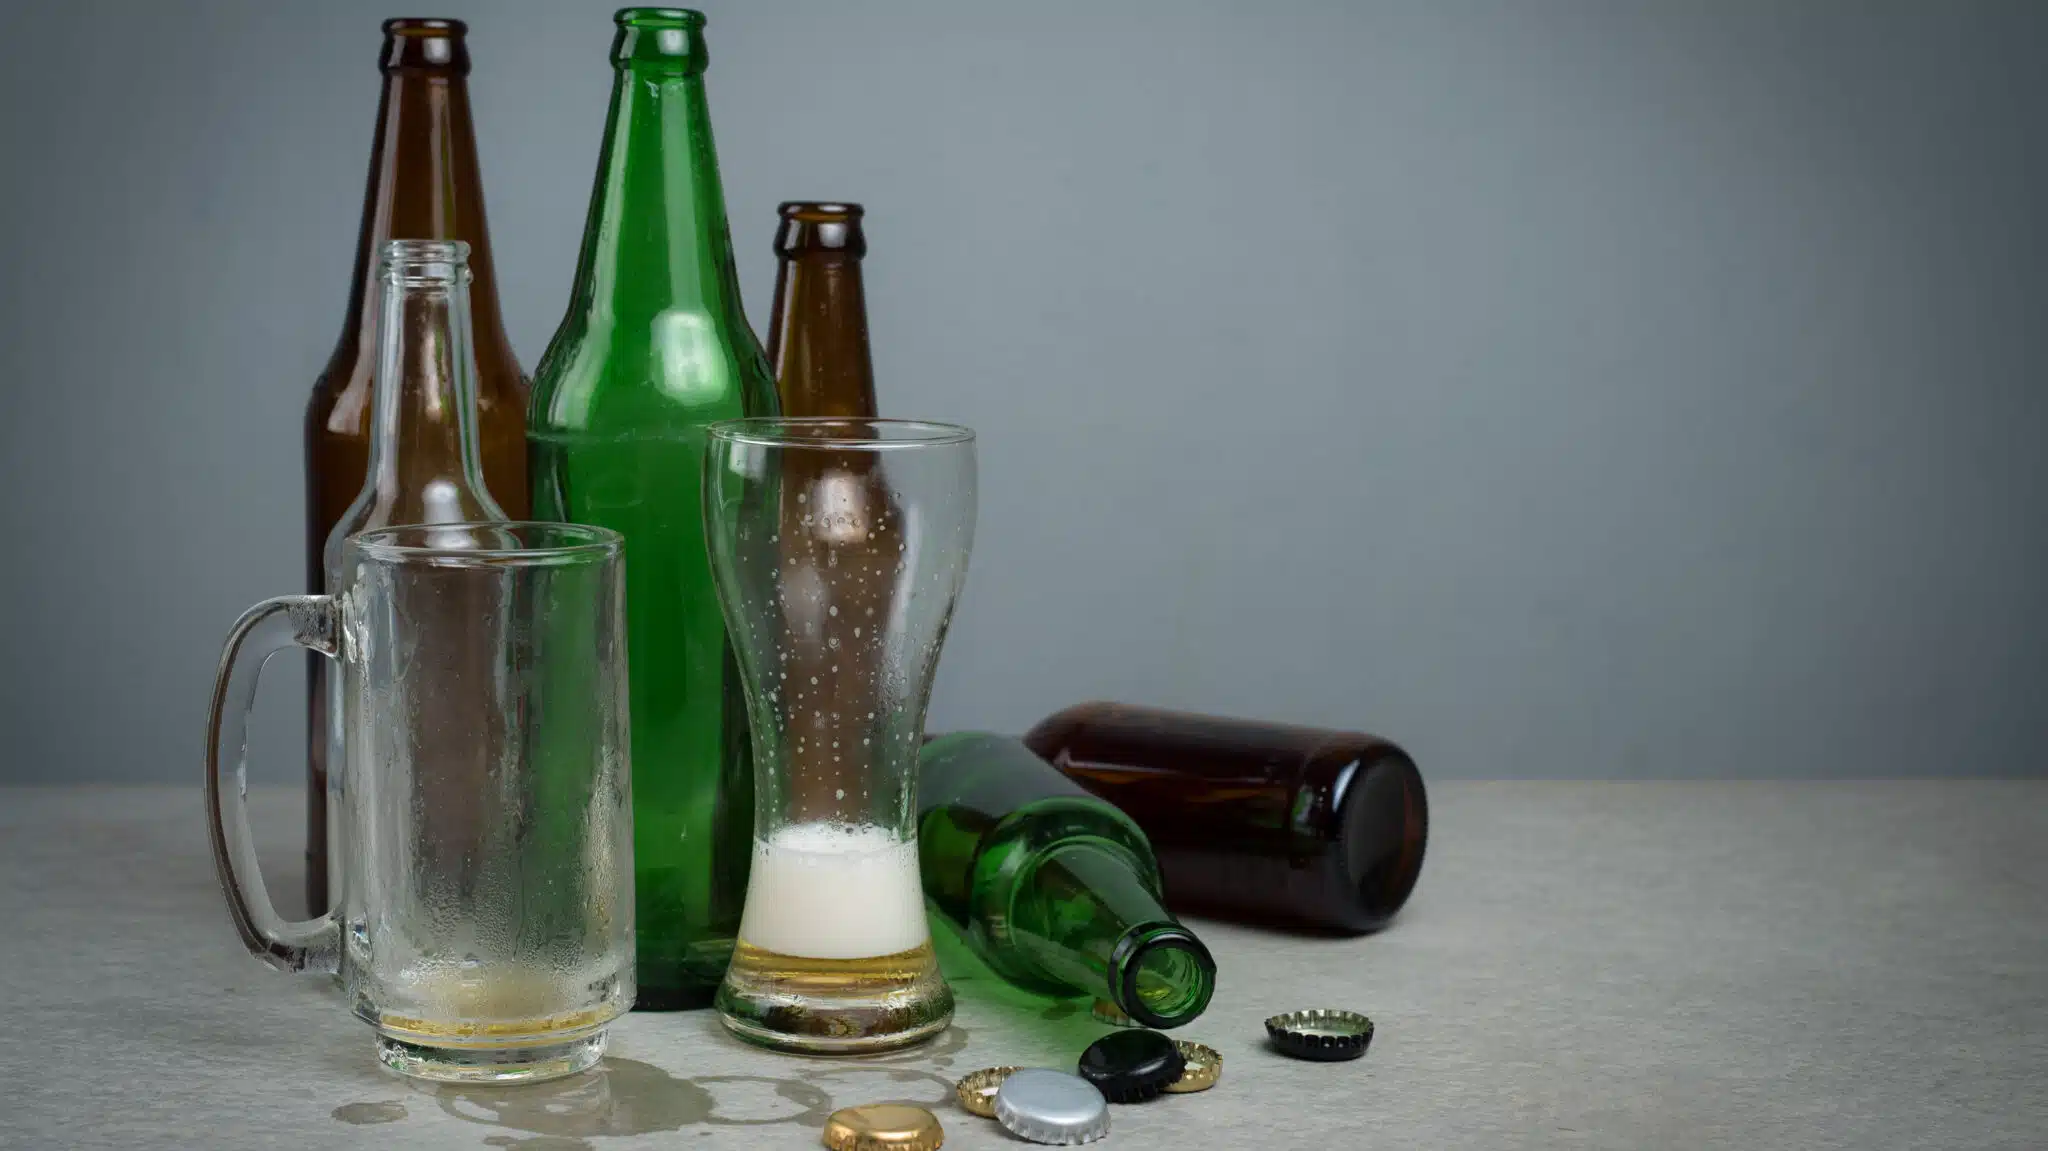 A collection of empty beer bottles, a glass, and a mug - 10 Signs Of Drinking Too Much